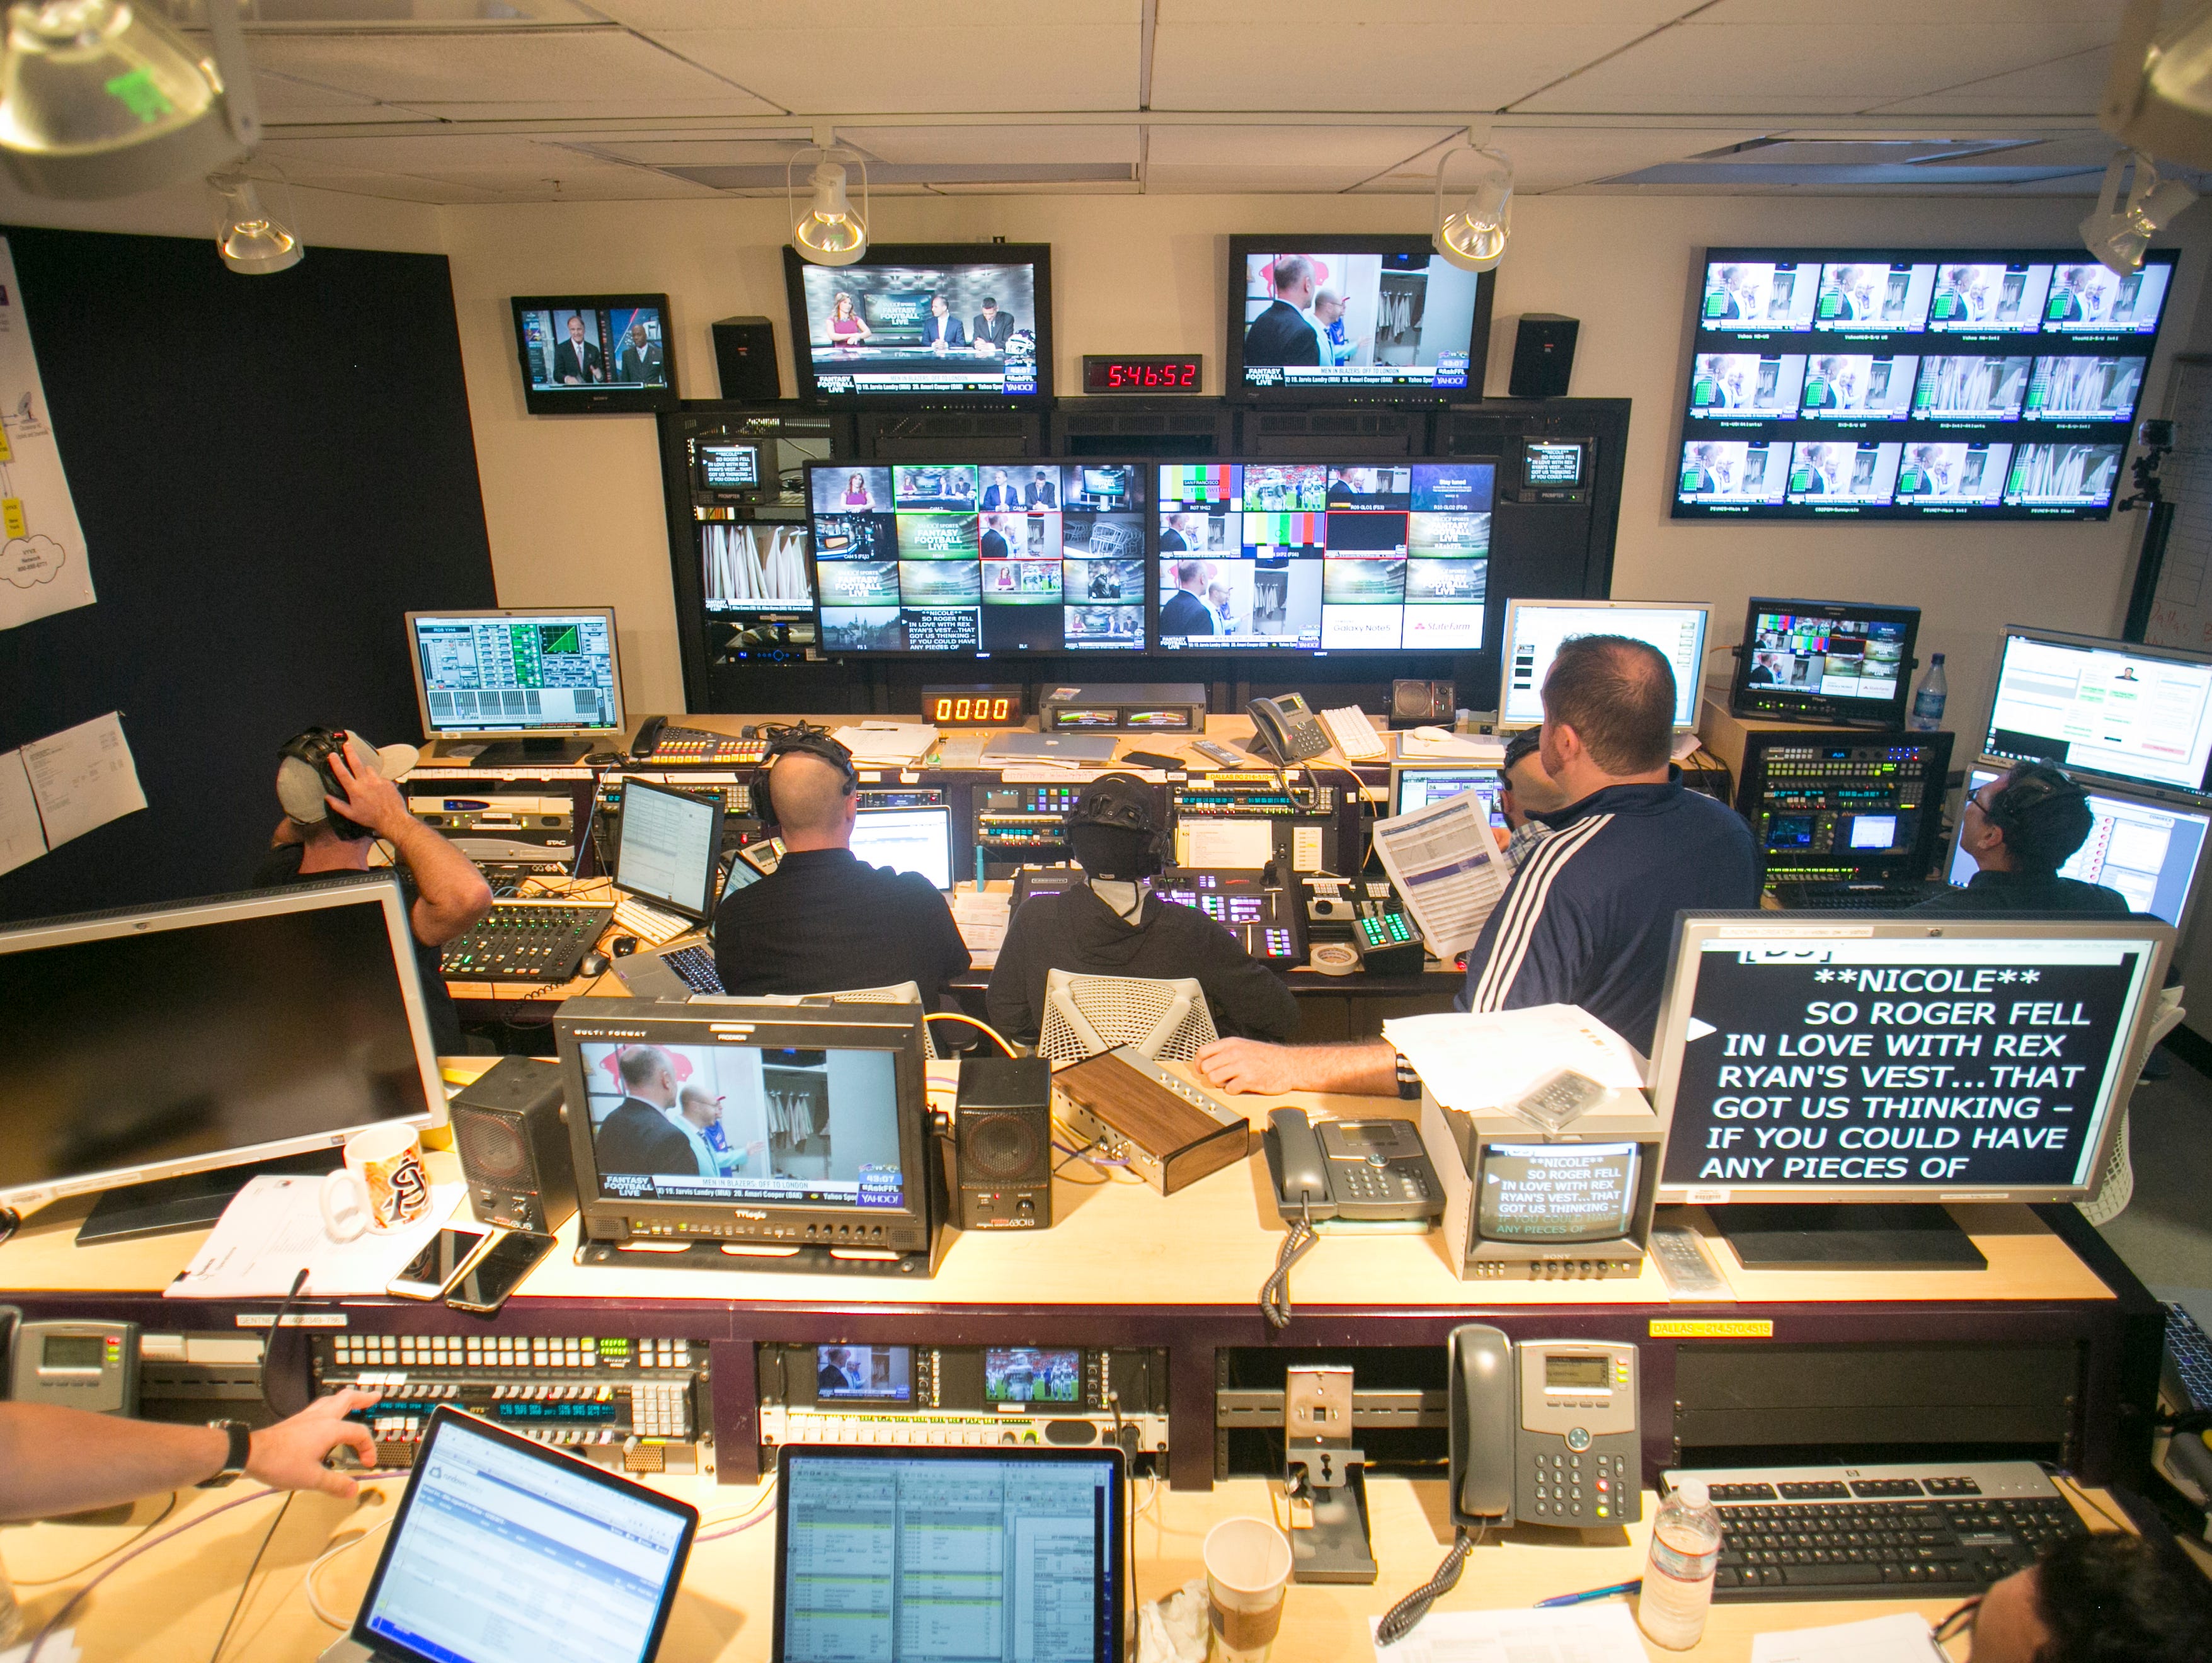 A behind the scenes photo of Yahoo's control room for the Oct. 25, 2015 NFL livestream